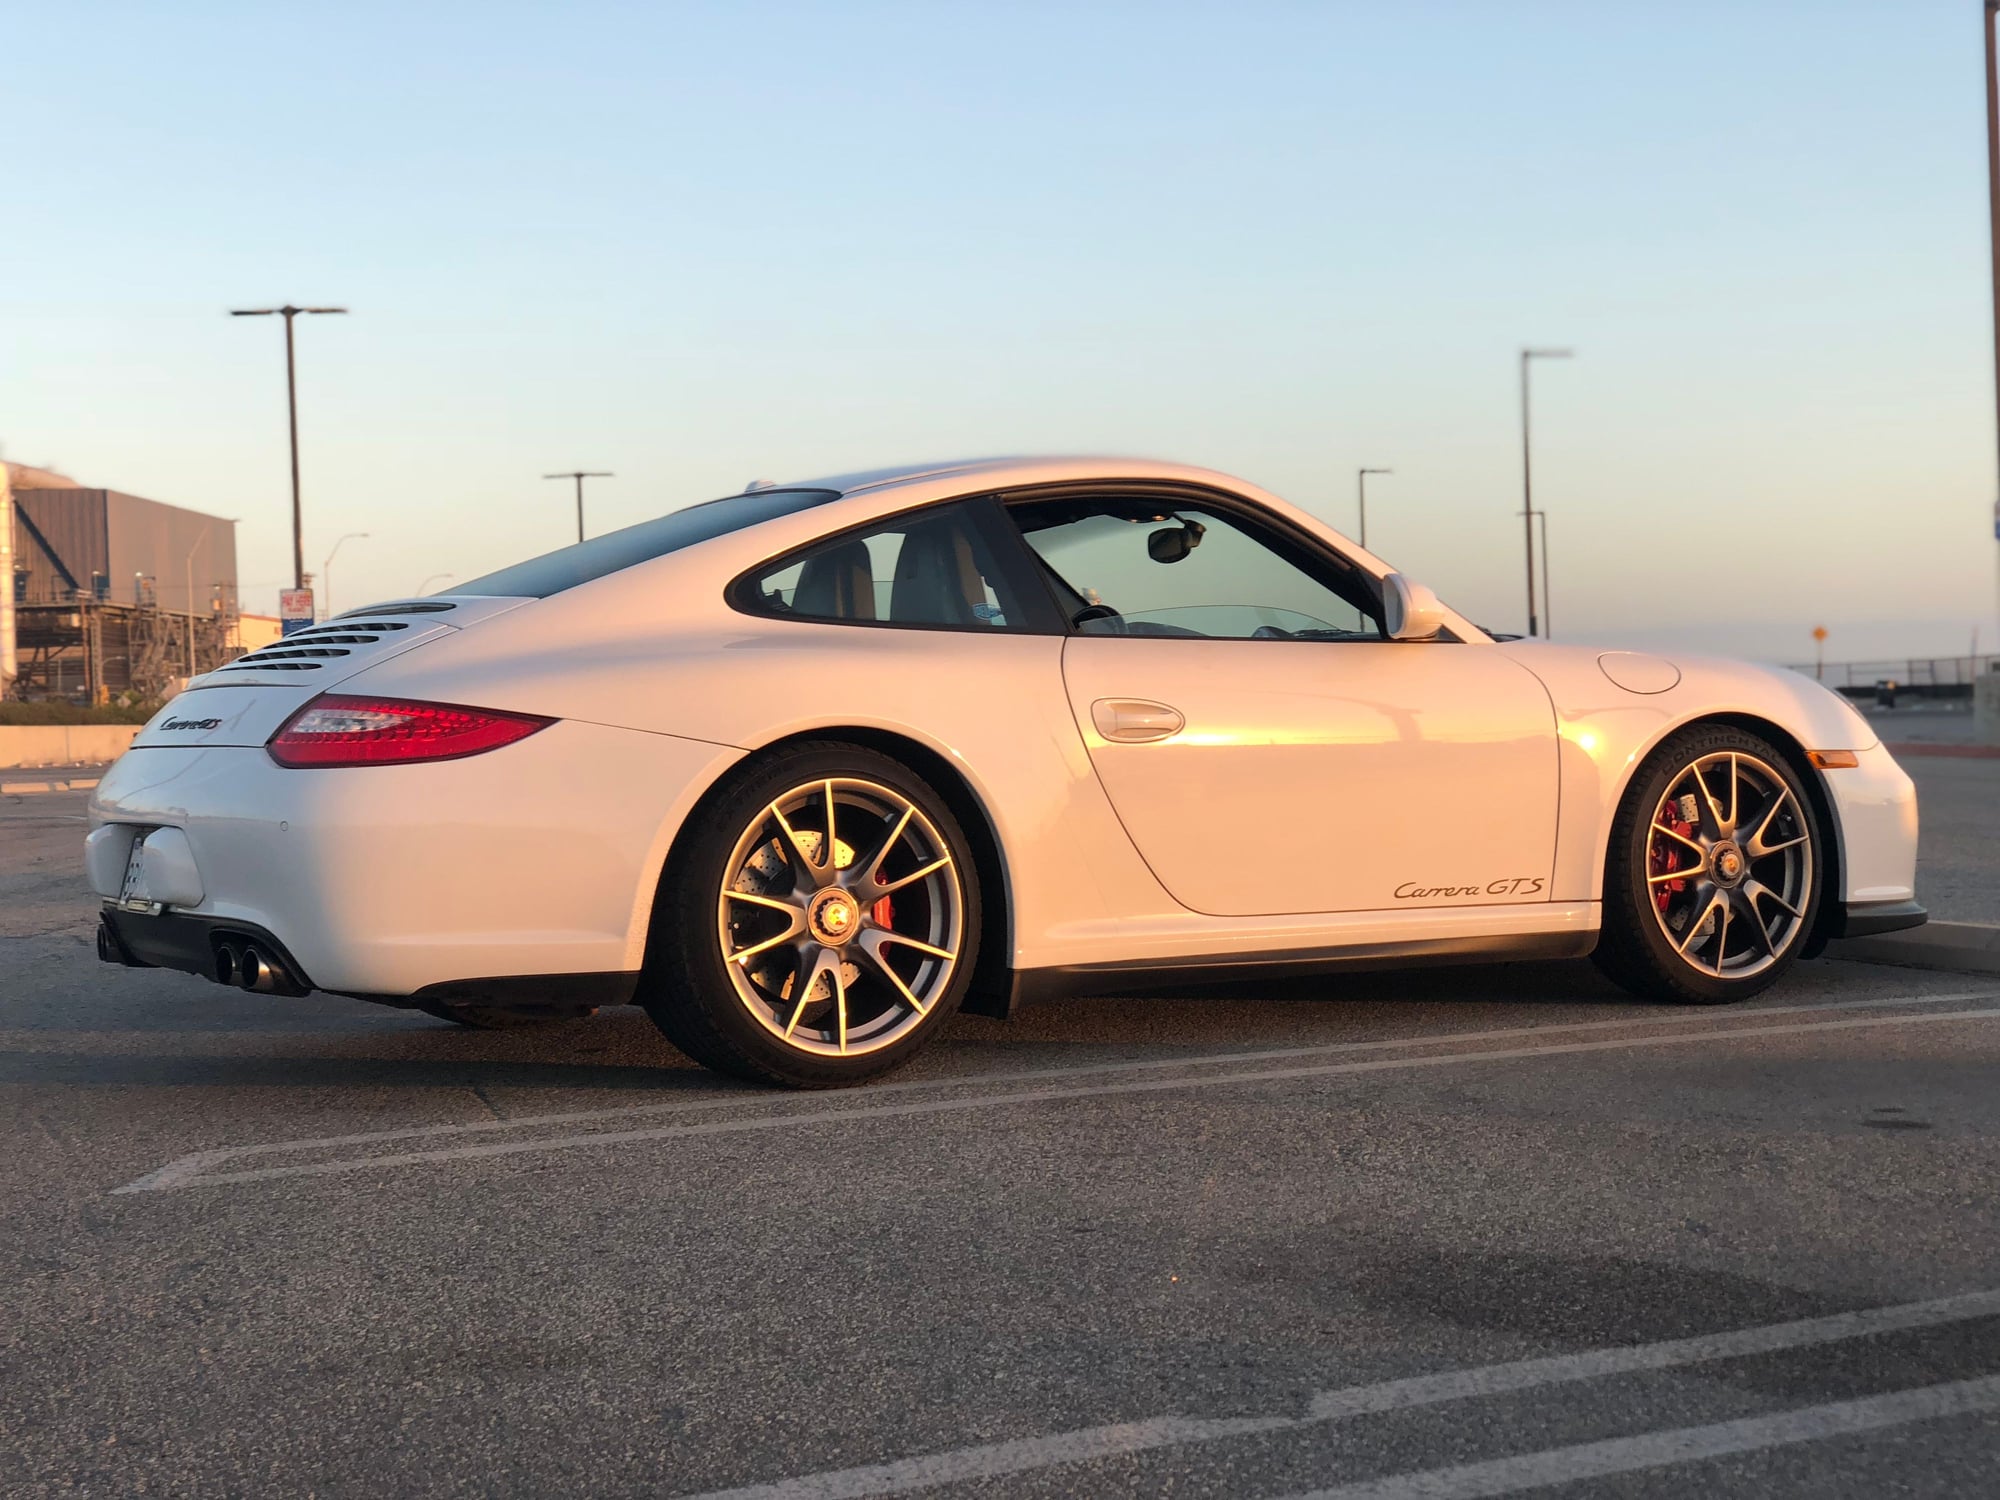 Wheels and Tires/Axles - 997.2 CL GT3 wheel set w/ Continental Tires $2,800 - Used - 2010 to 2012 Porsche GT3 - Playa Del Rey, CA 90293, United States